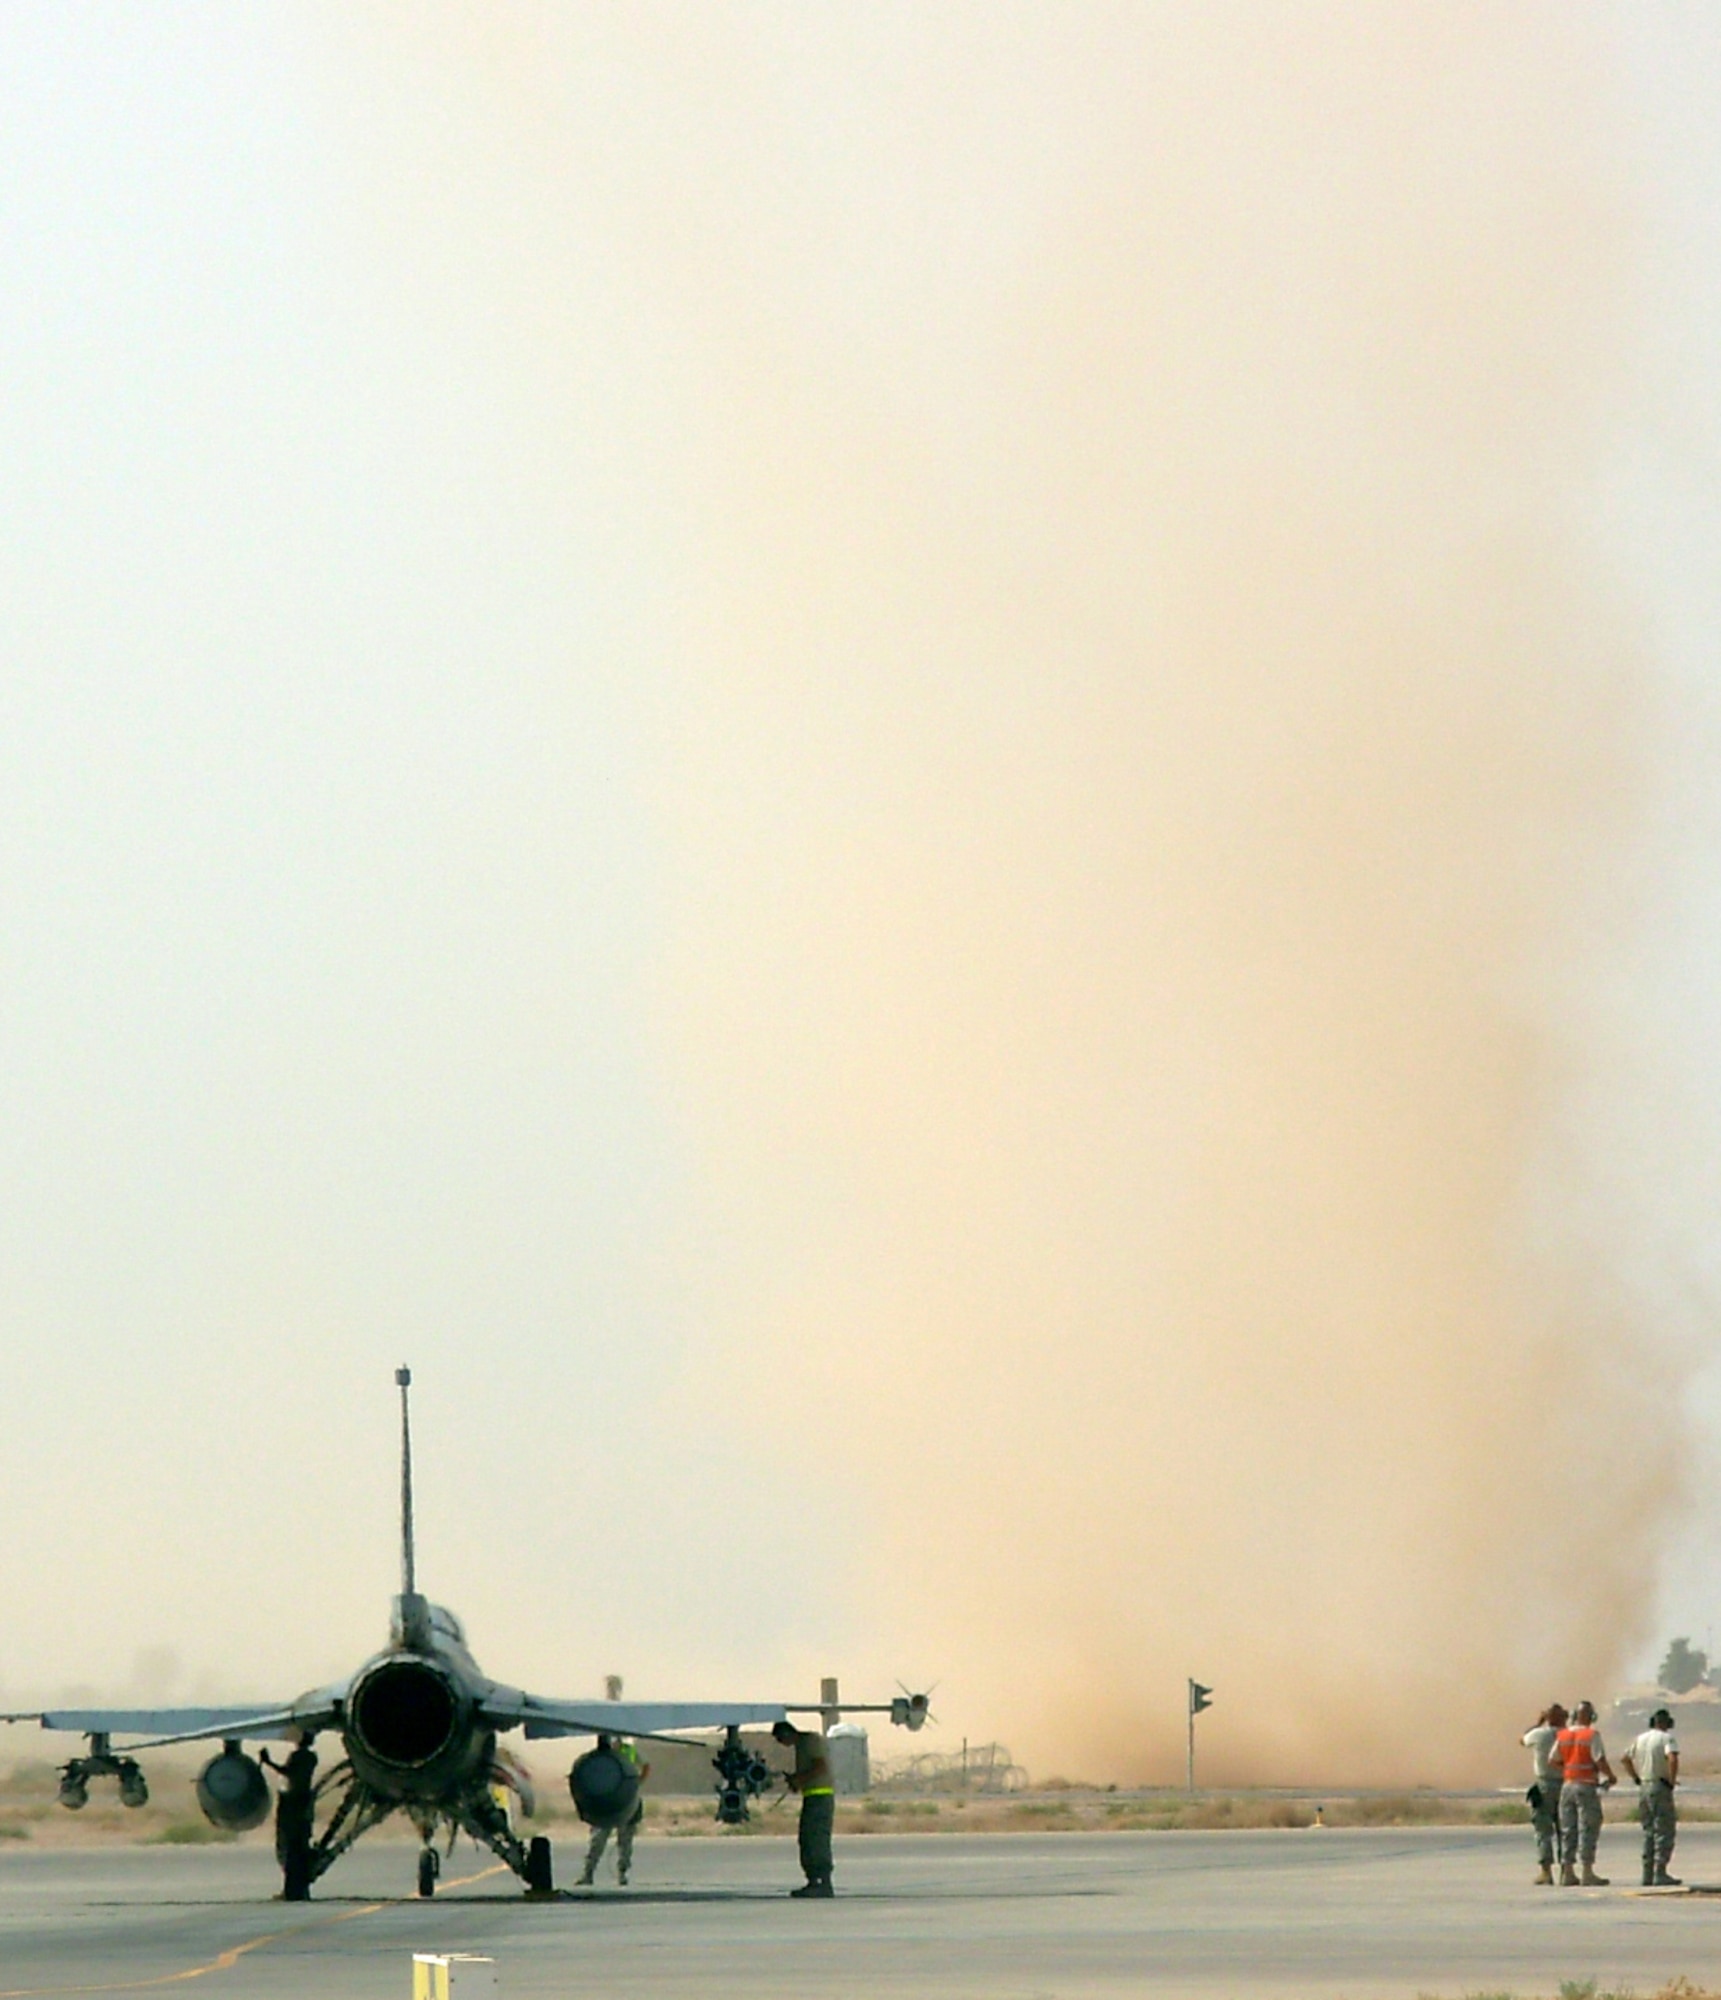 JOINT BASE BALAD, Iraq -- A dust devil blows through the airfield near an F-16 Fighting Falcon here Aug. 28. The aircraft was in the north de-arm area after returning from a mission. The flat terrain, clear skies and light wind typical of summers here makes dust devils a common phenomenon. While they can reach more than 1,000 meters in height, they are much less intense than tornadoes. (U.S. Air Force photo/Capt. Jeffrey Godzik)